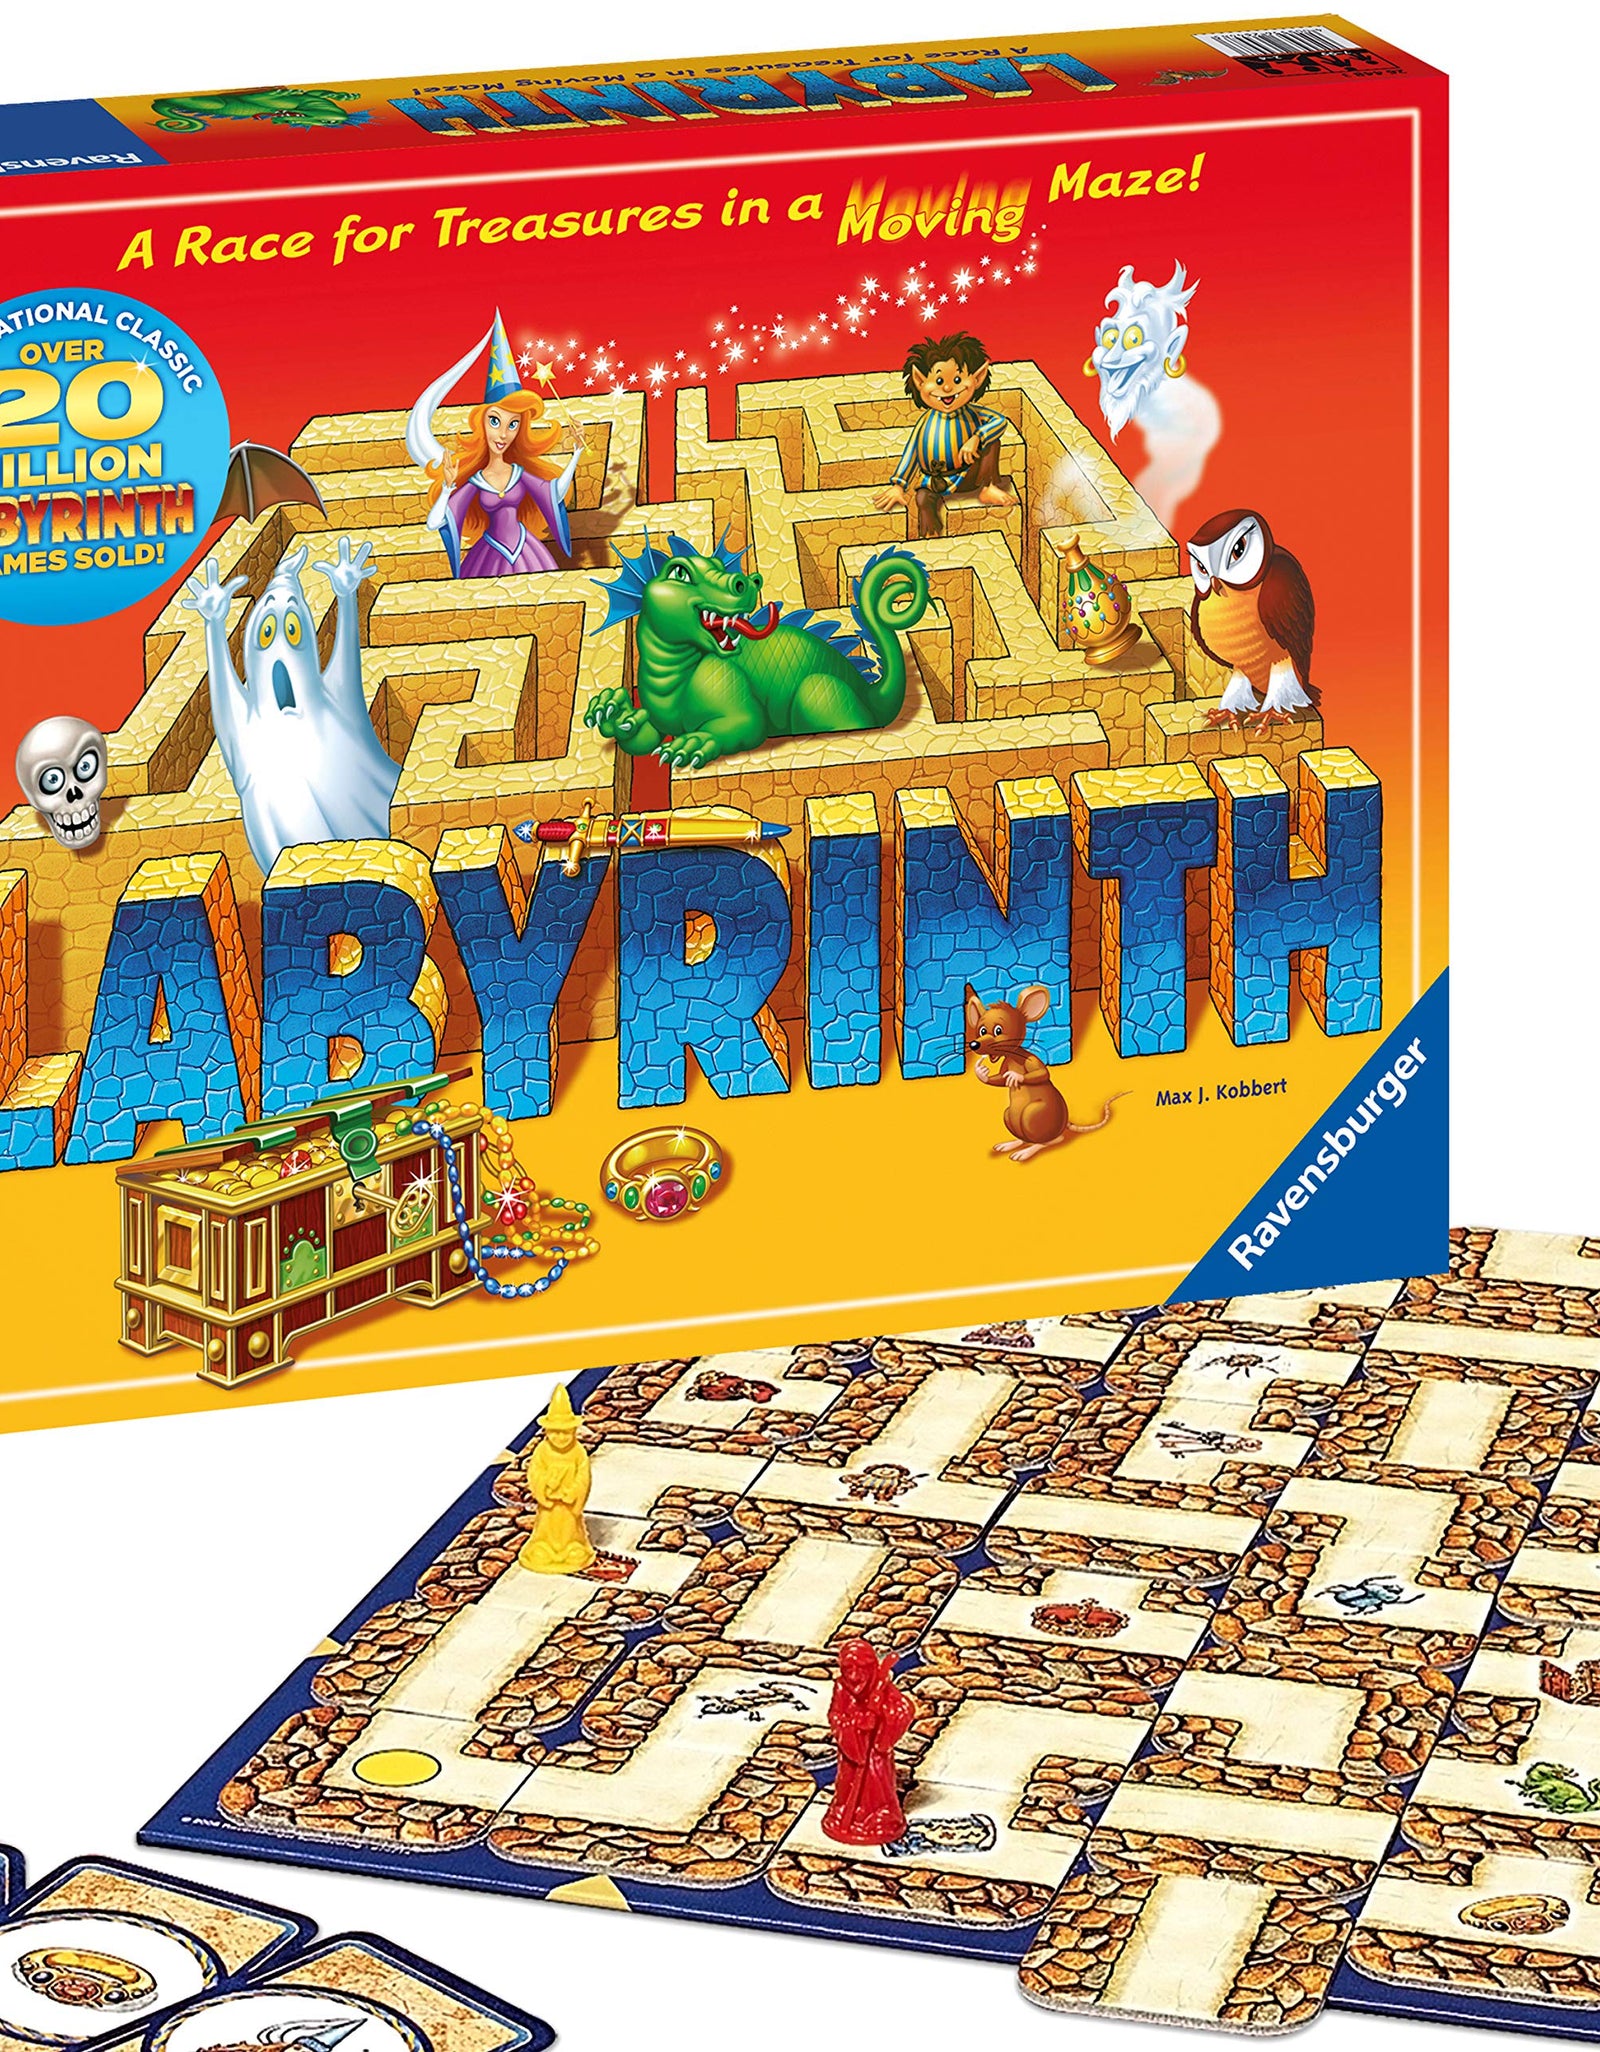 Ravensburger Labyrinth Family Board Game for Kids and Adults Age 7 and Up - Millions Sold, Easy to Learn and Play with Great Replay Value (26448)